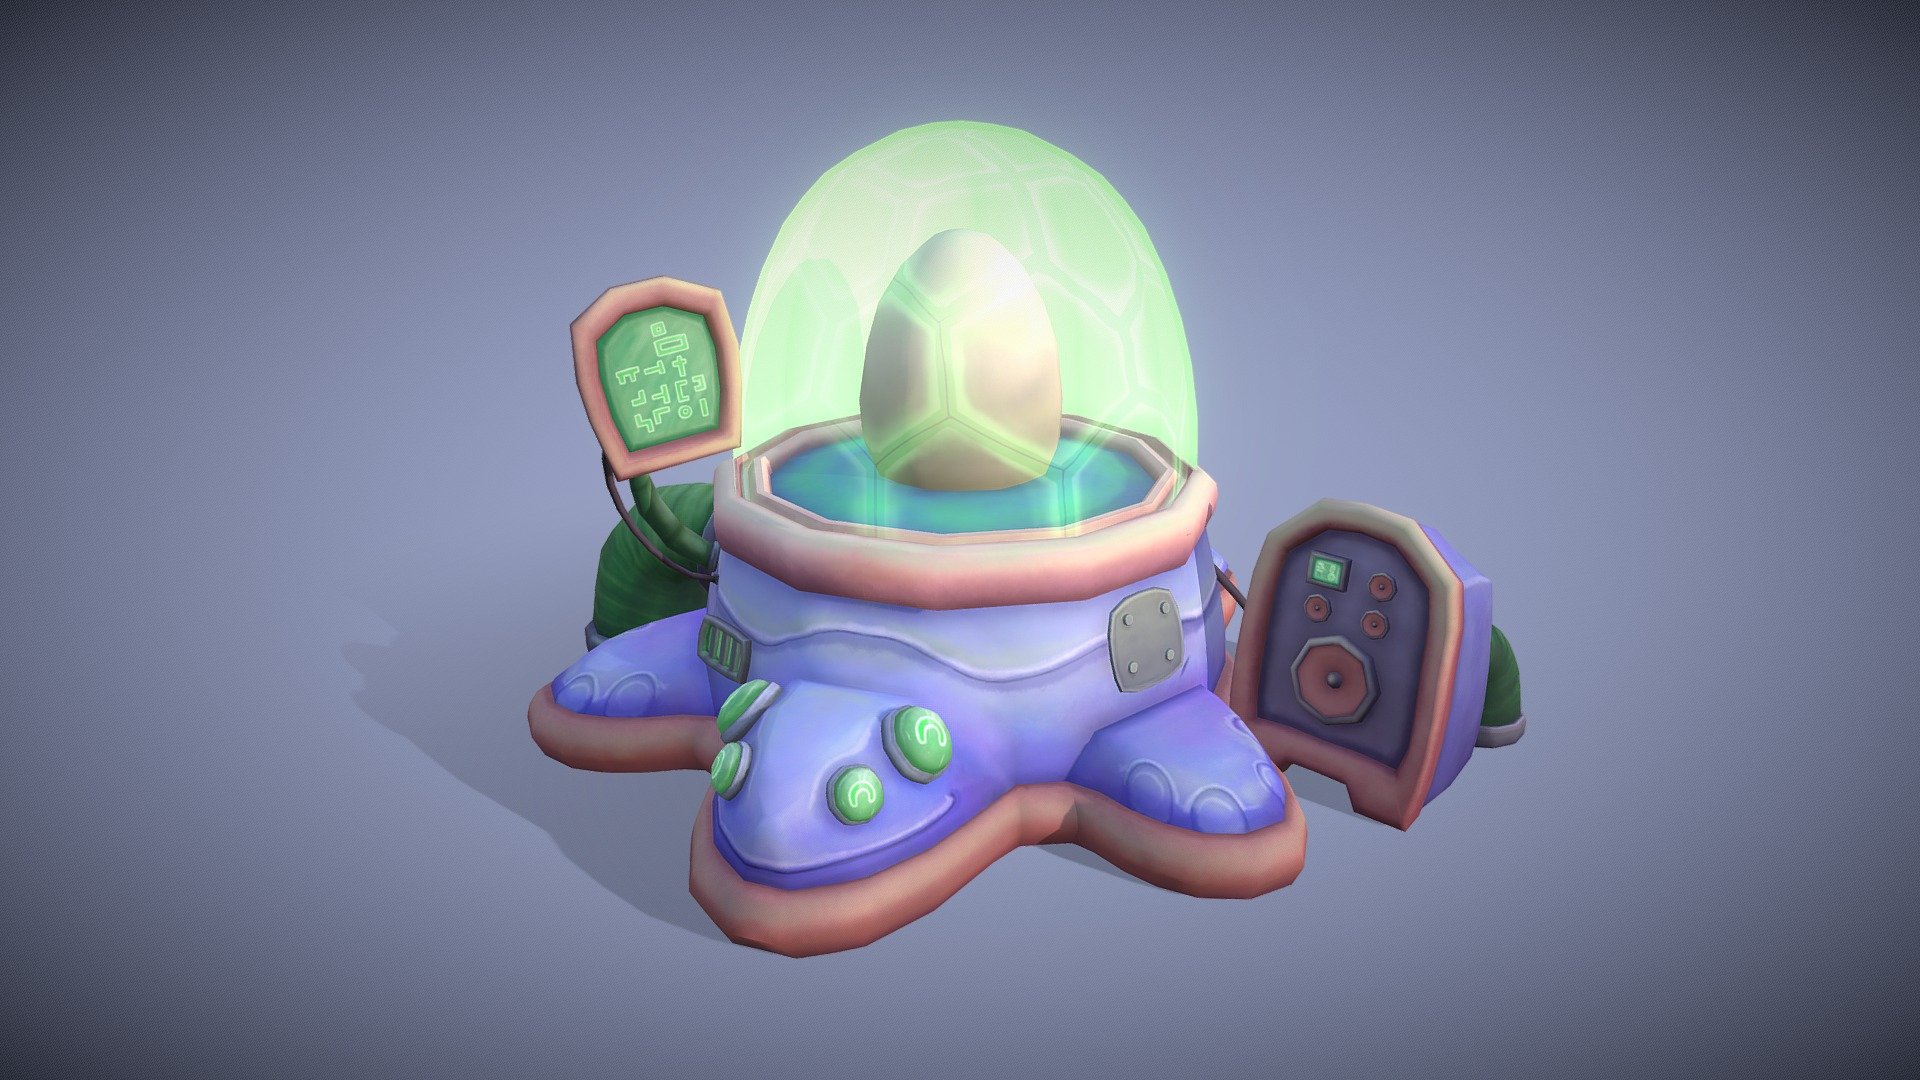 This was designed to be an incubator for turtle aliens. I wanted it to be cute.
I concepted, modeled, and textured this science fiction prop for CGMA's Creating Stylized Game Assets class, taught by Ashleigh Warner 3d model